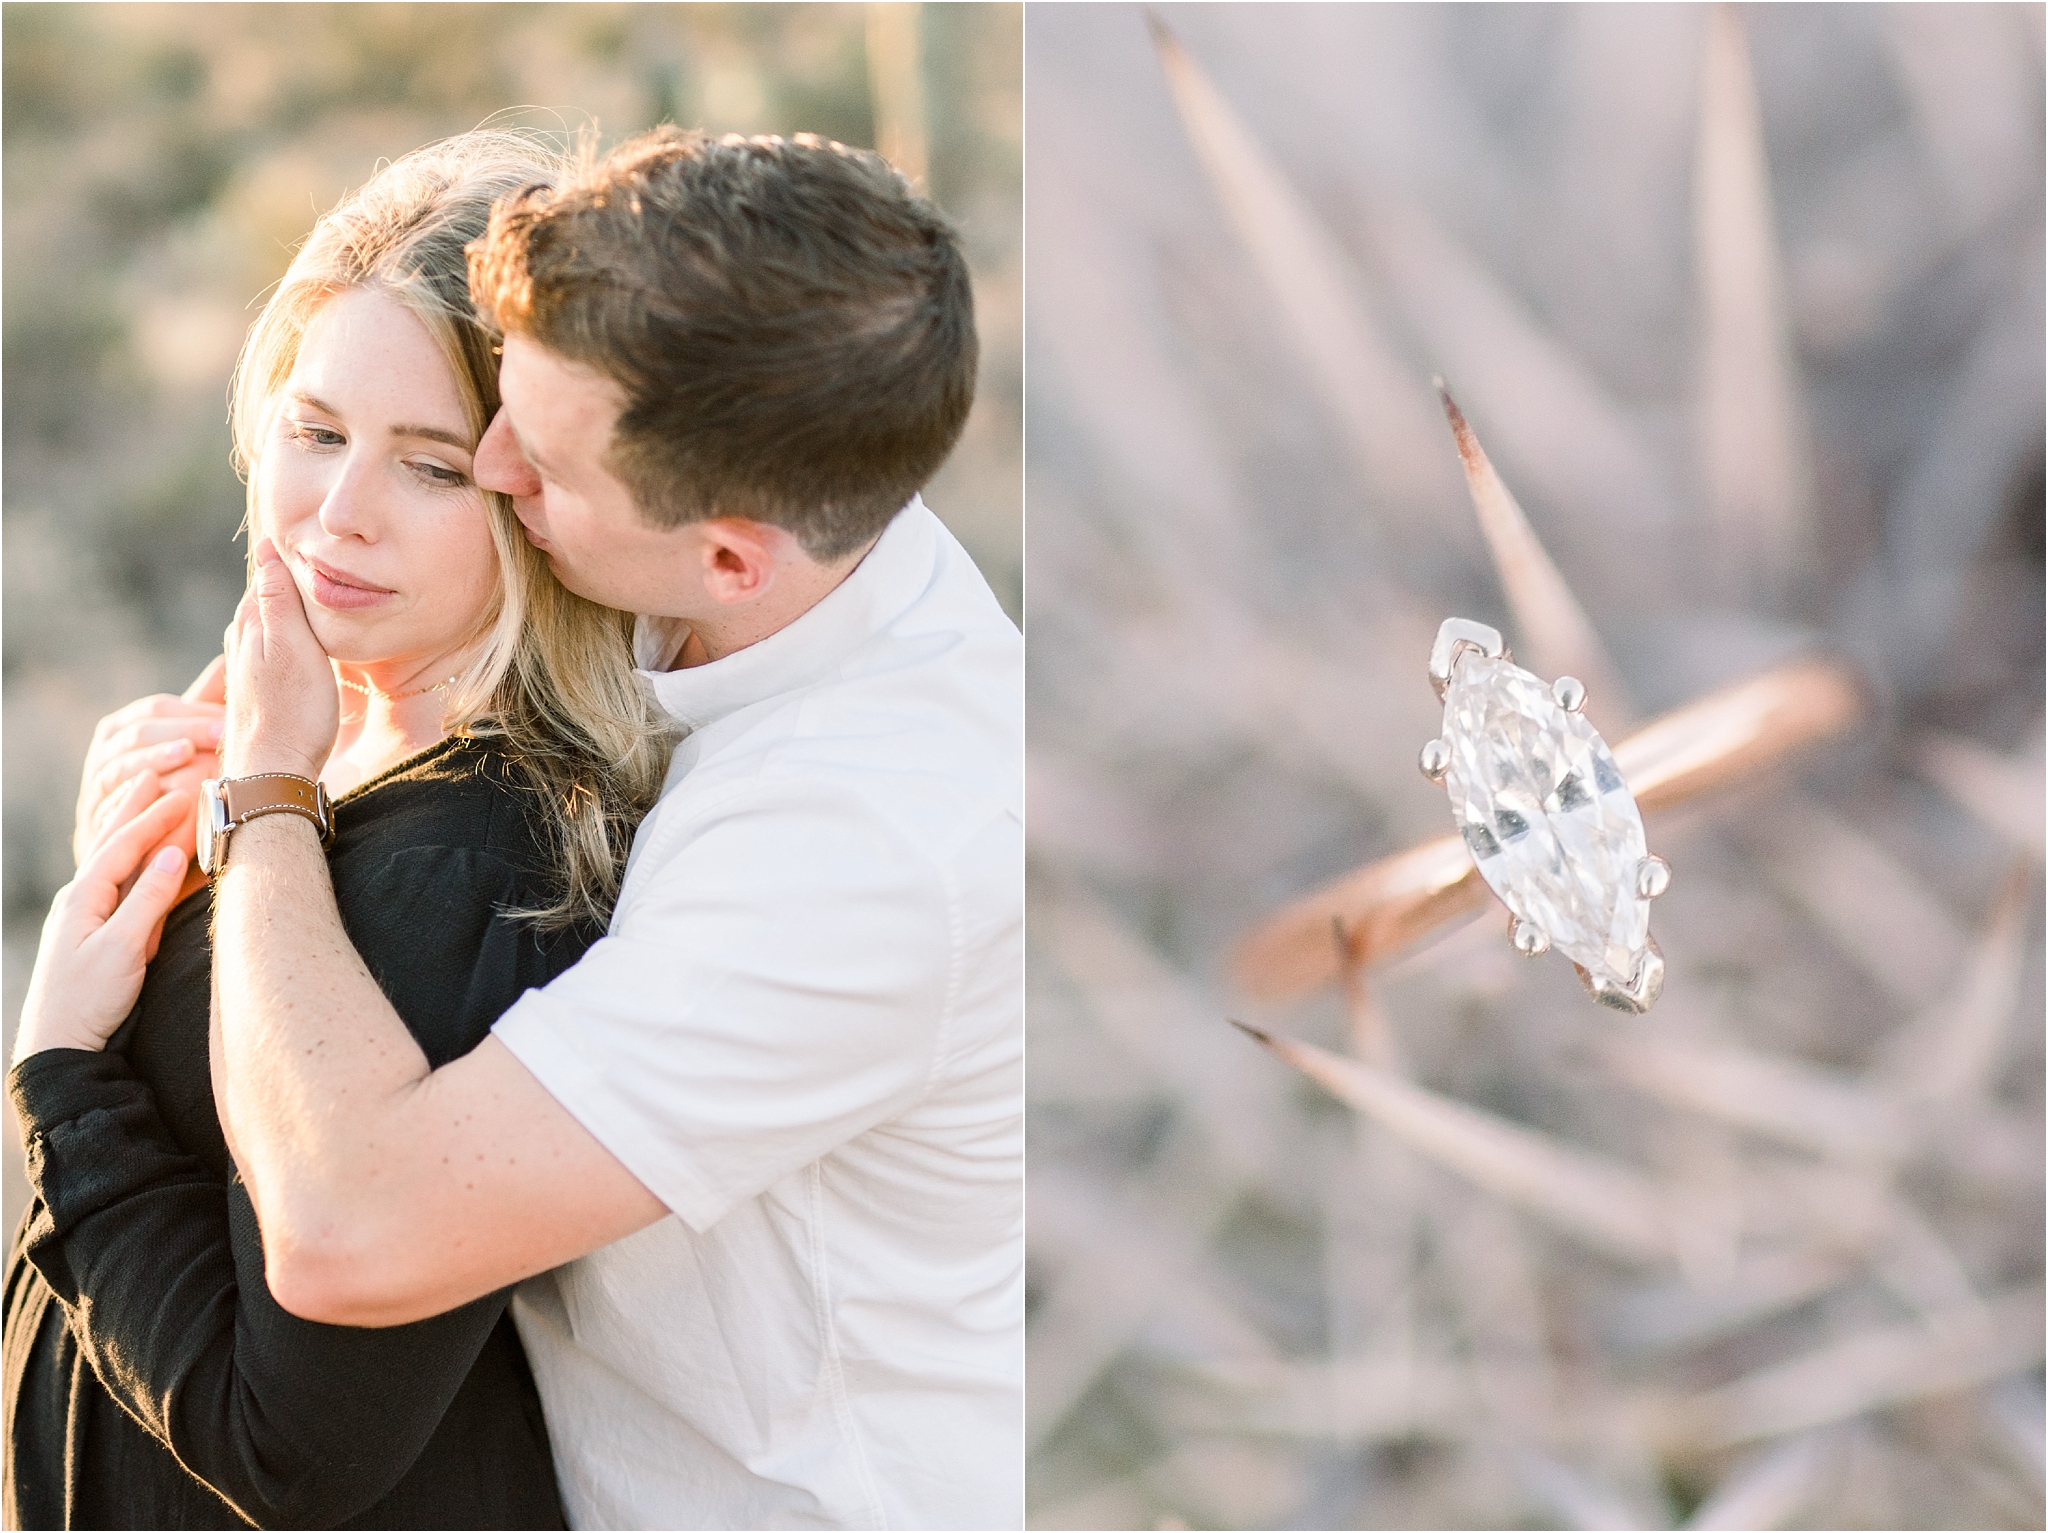 Gates Pass desert engagement session by Tucson Wedding Photographer Anne and Bryan